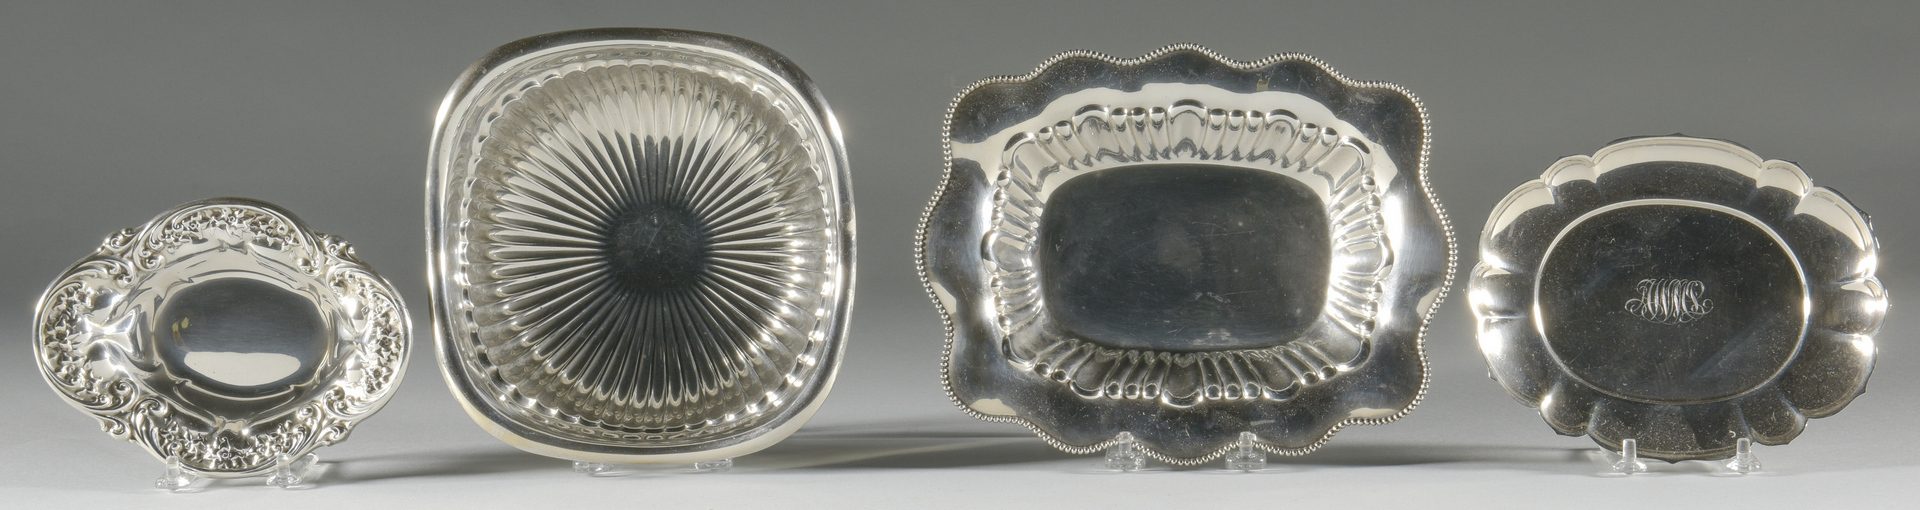 Lot 908: 4 Small Sterling Bowls